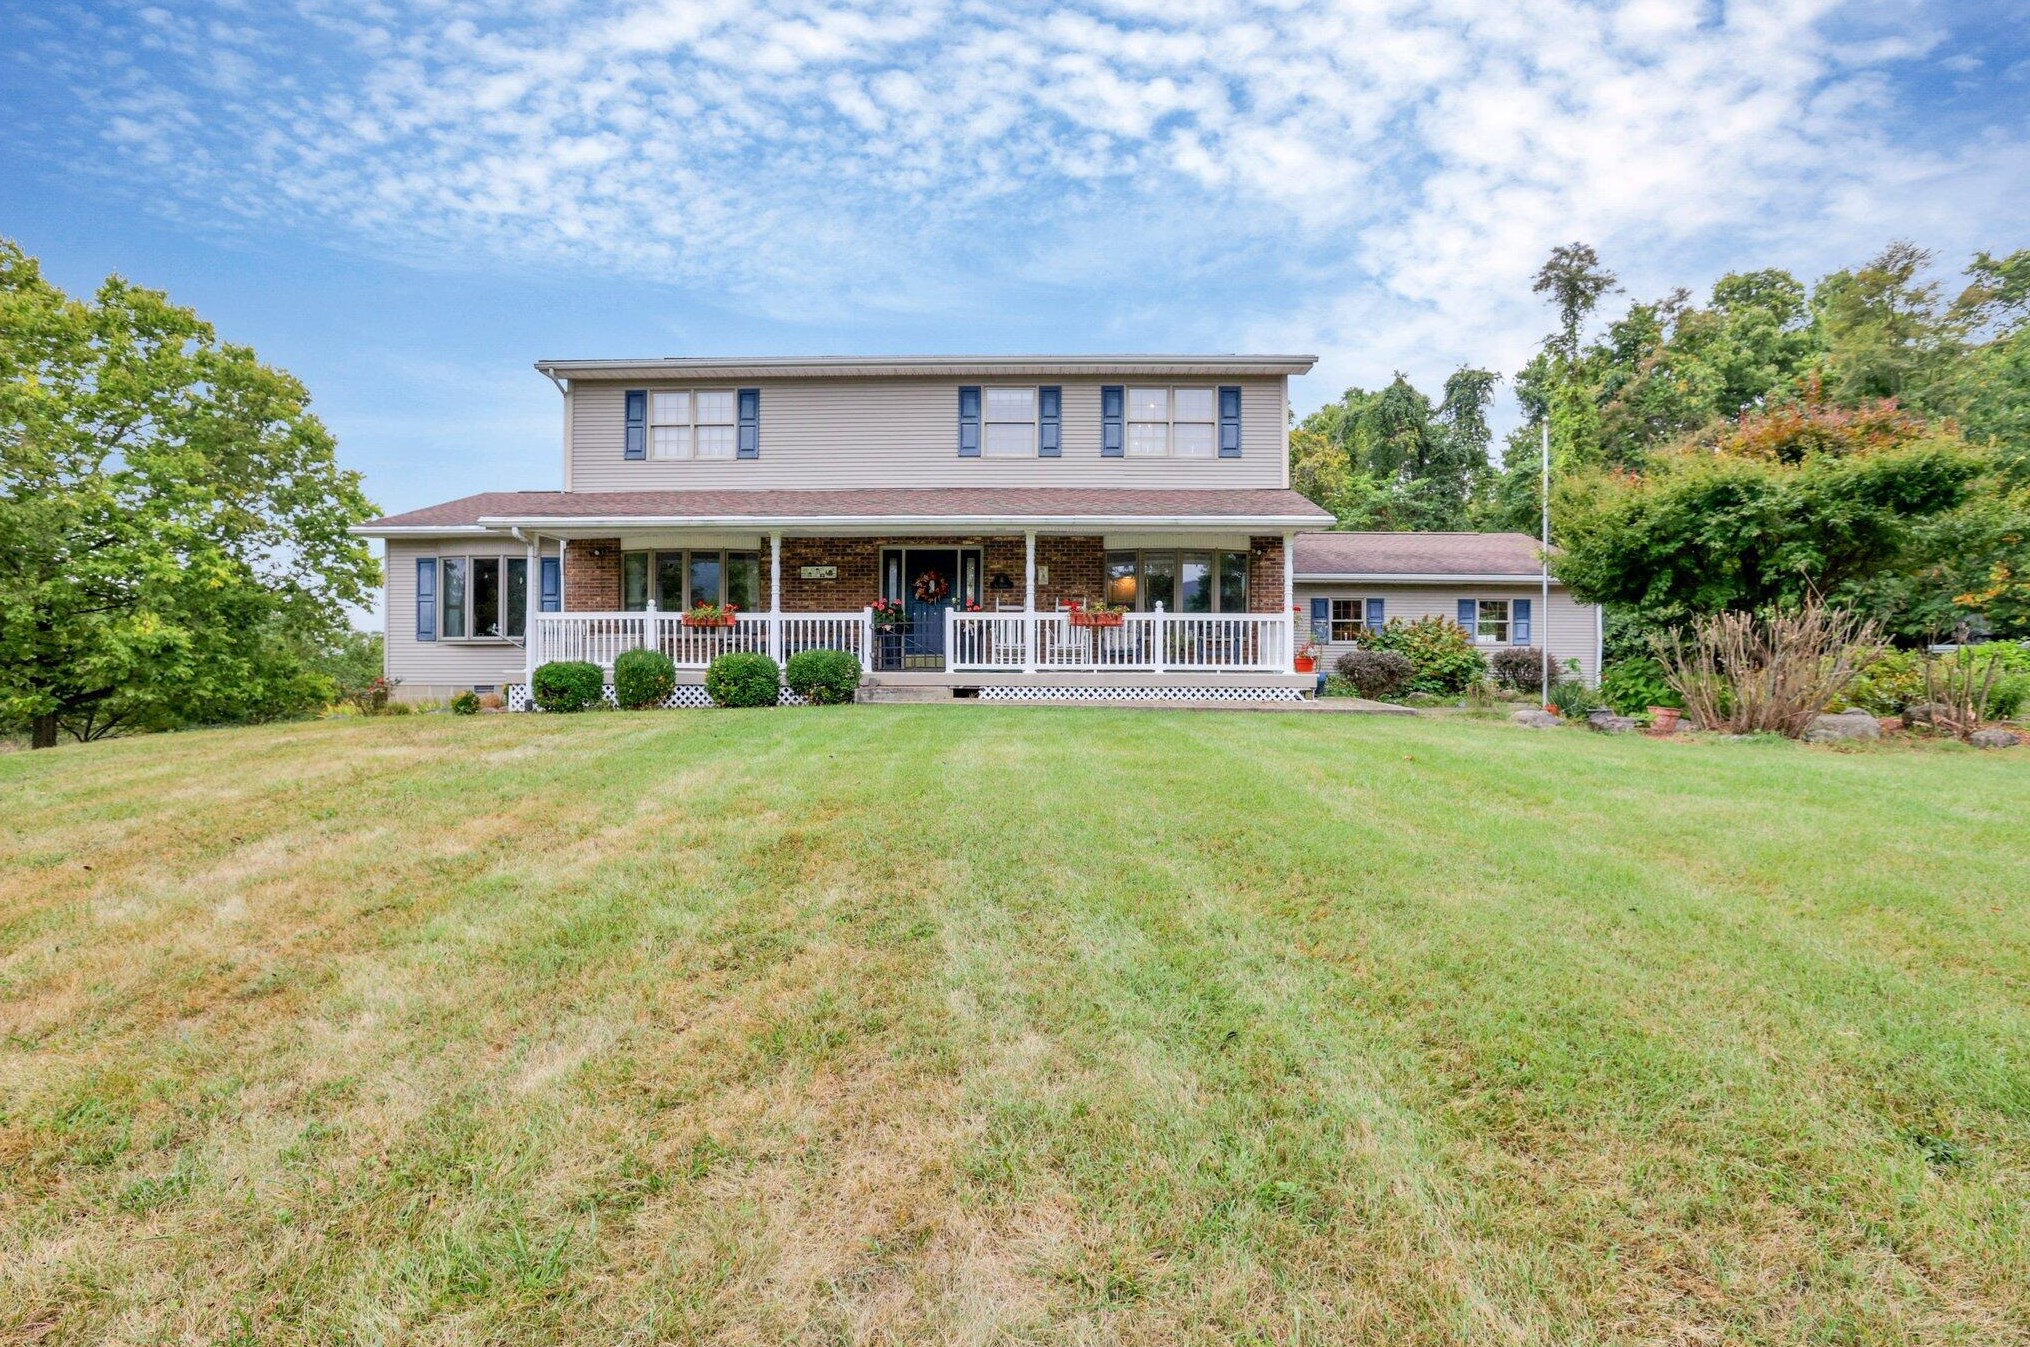 669 Schrake Rd, Chillicothe, OH 45601